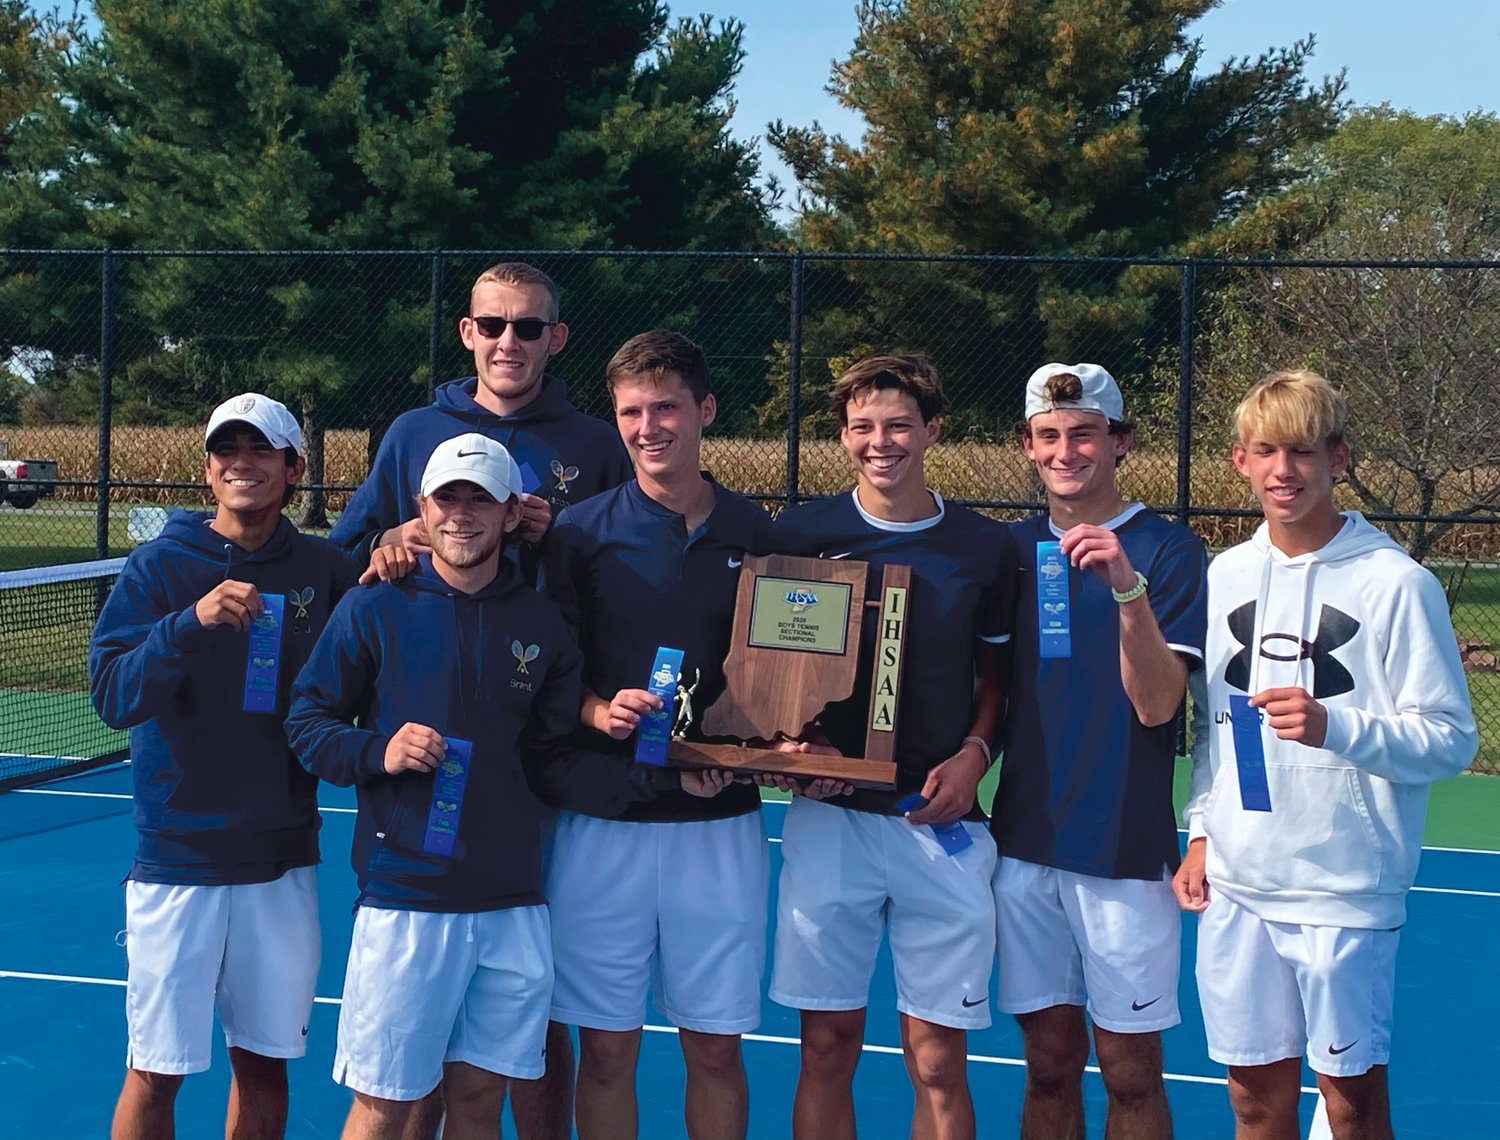 Led by six seniors, Fountain Central took home a fourth-straight sectional title on Saturday with a 3-2 win over Covington on Saturday.